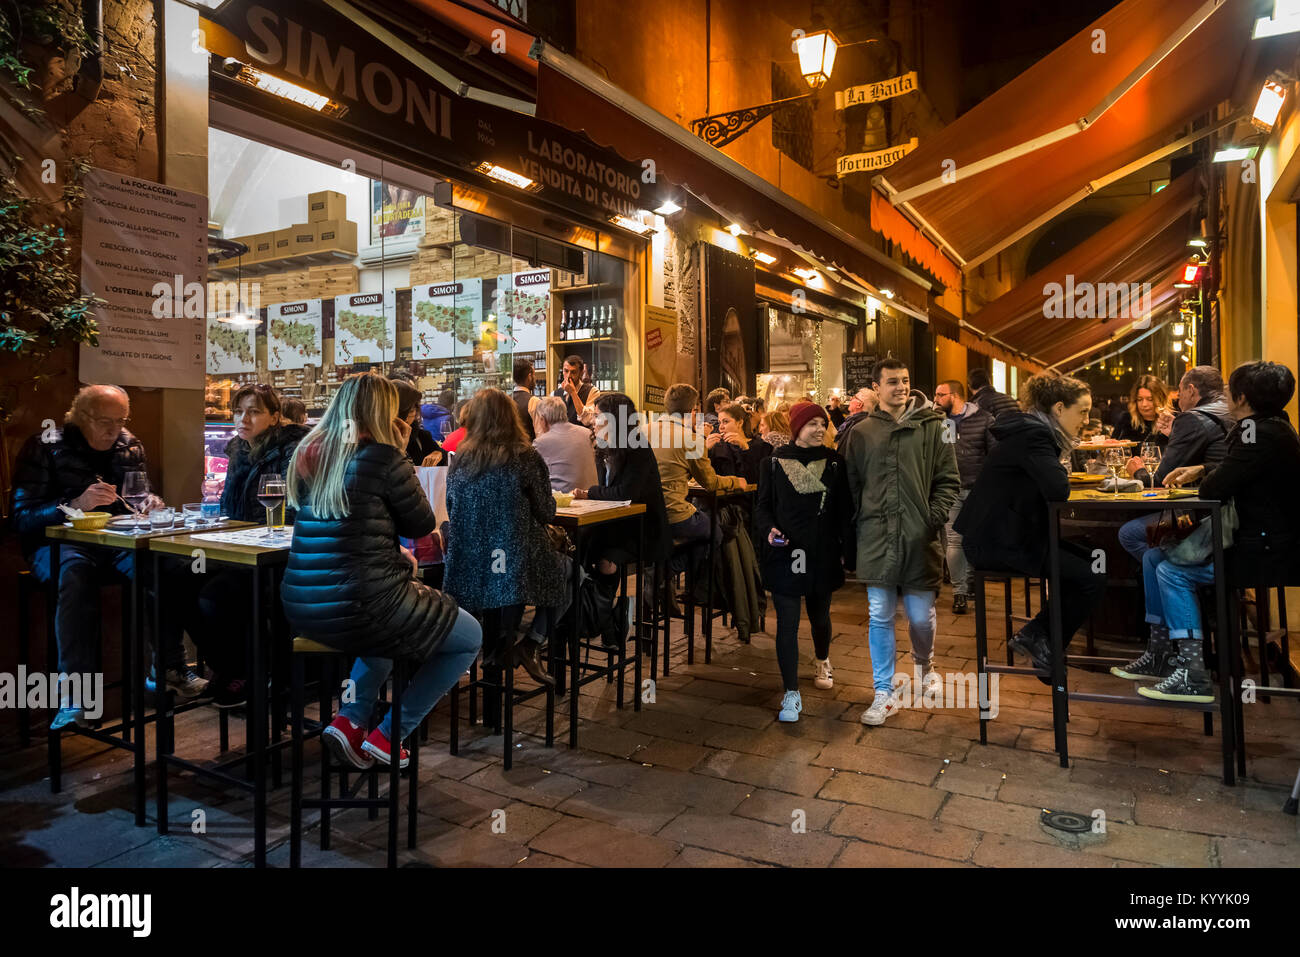 People sitting out eating and drinking in restaurants, cafes and bars in Via Pescherie Vecchie, a street in Bologna city, Italy at night Stock Photo